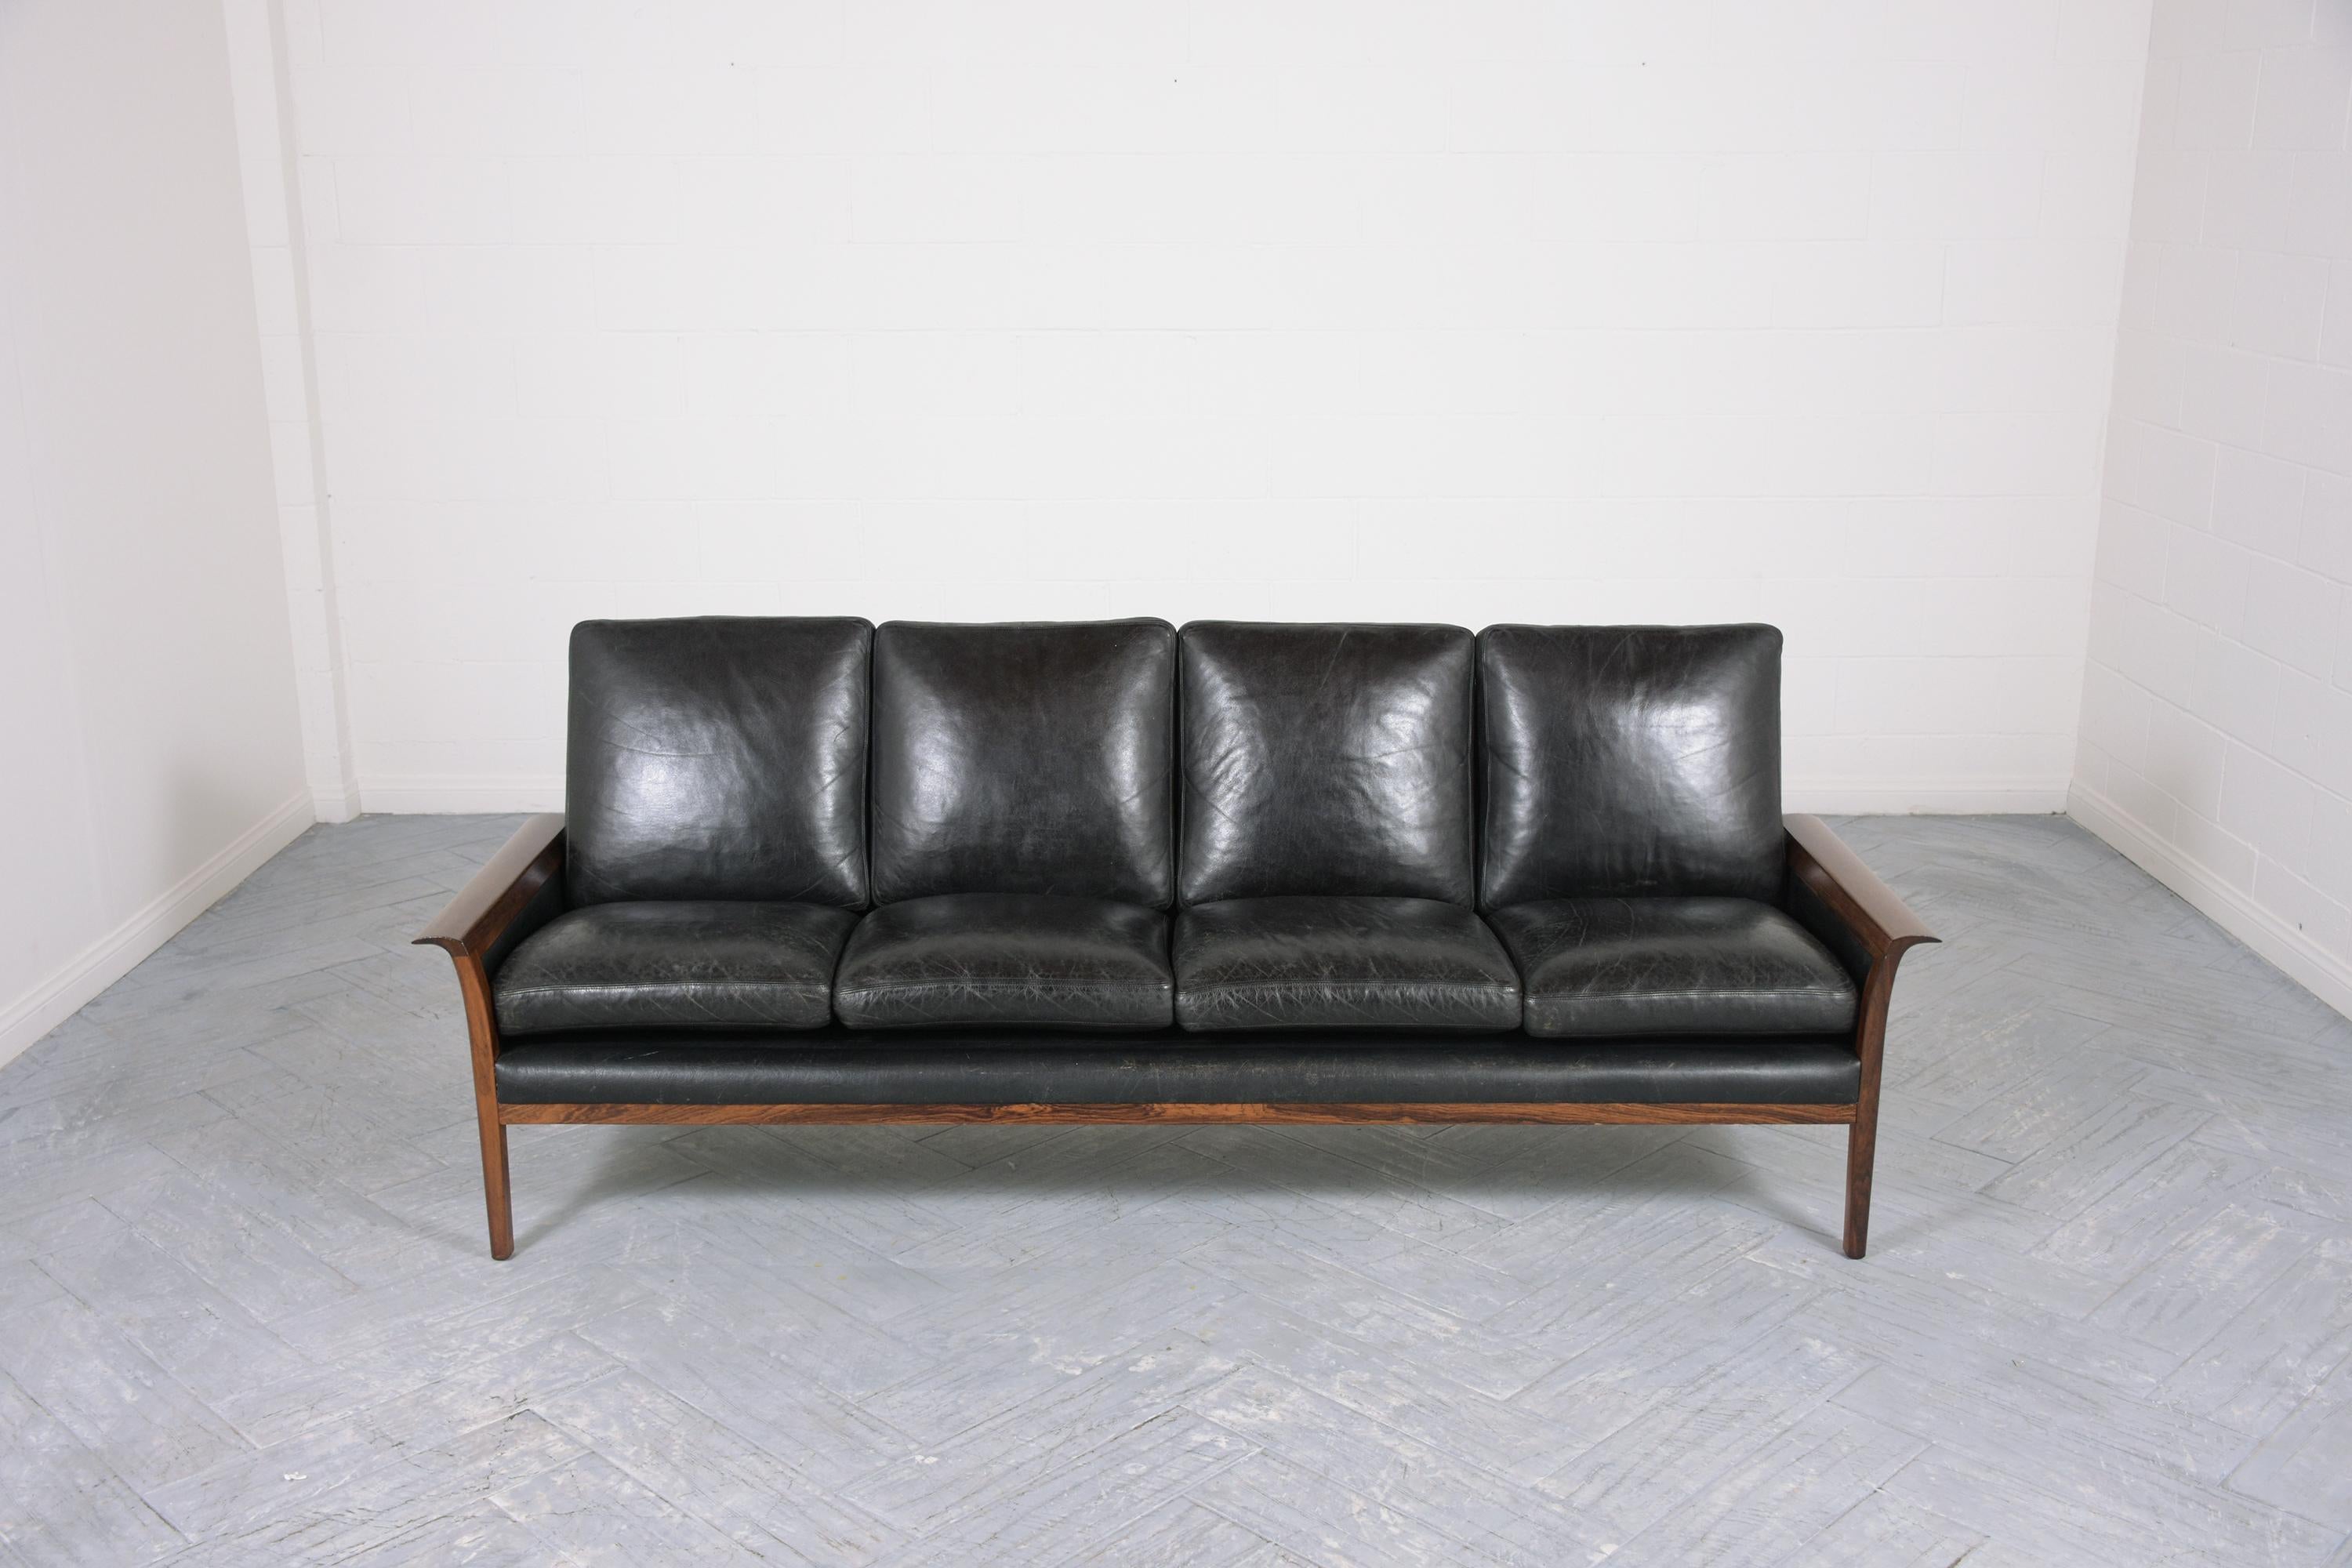 This extraordinary modern danish executive sofa by Illum Wikkelsø is hand-crafted out of rosewood & leather combination in great condition and has been completely restored by our professional craftsmen team. This sofa is eye-catching featuring a